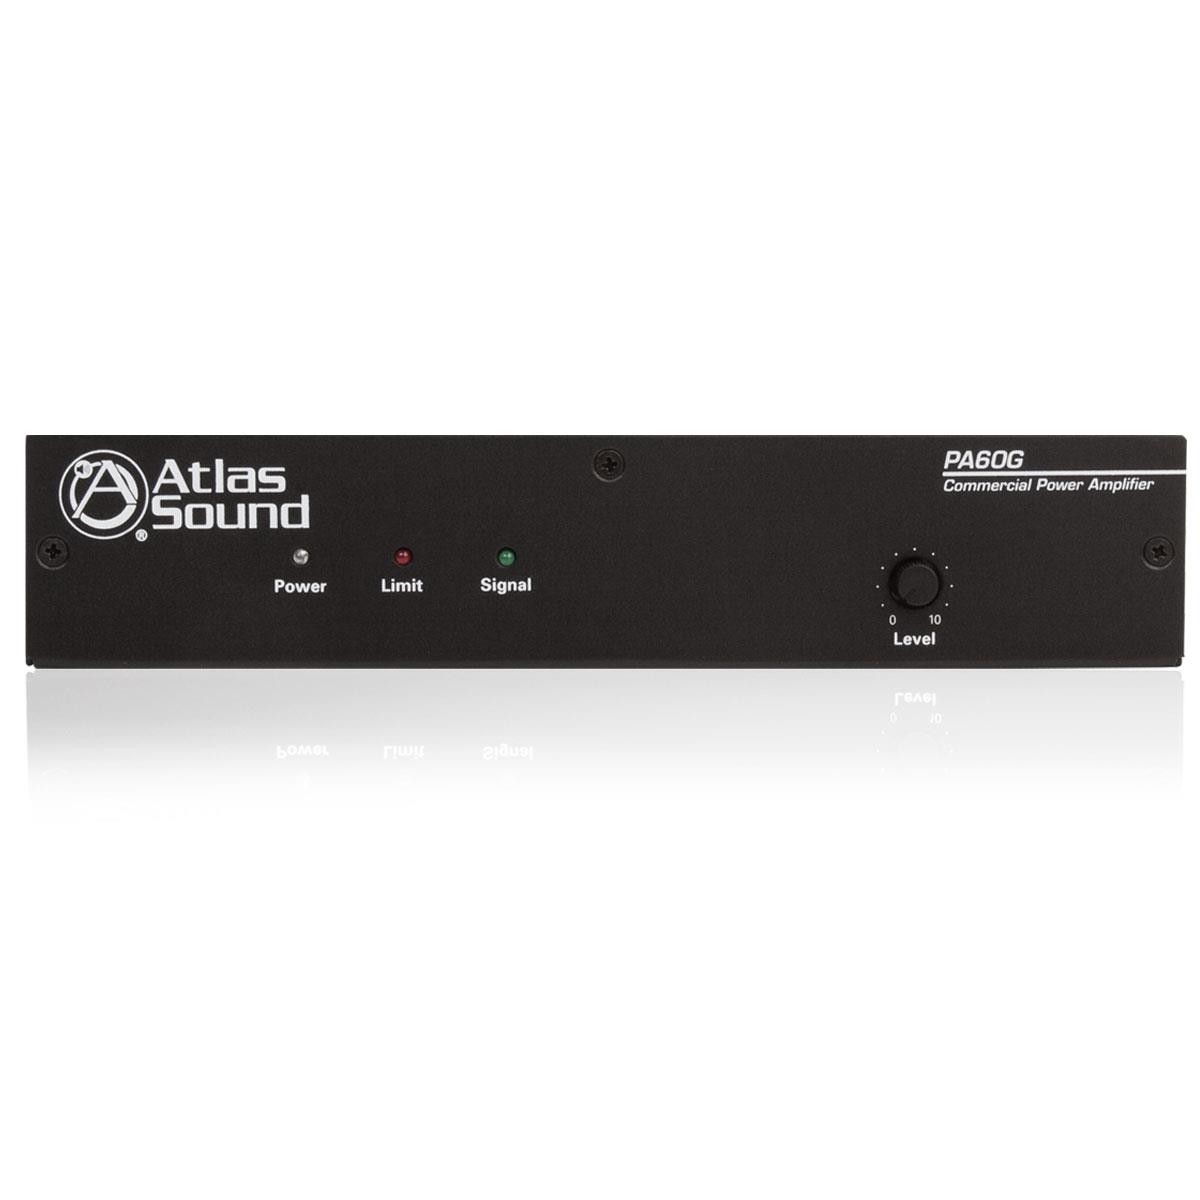 Image of Atlas Sound PA60G 60W Single Channel Commercial Power Amplifier